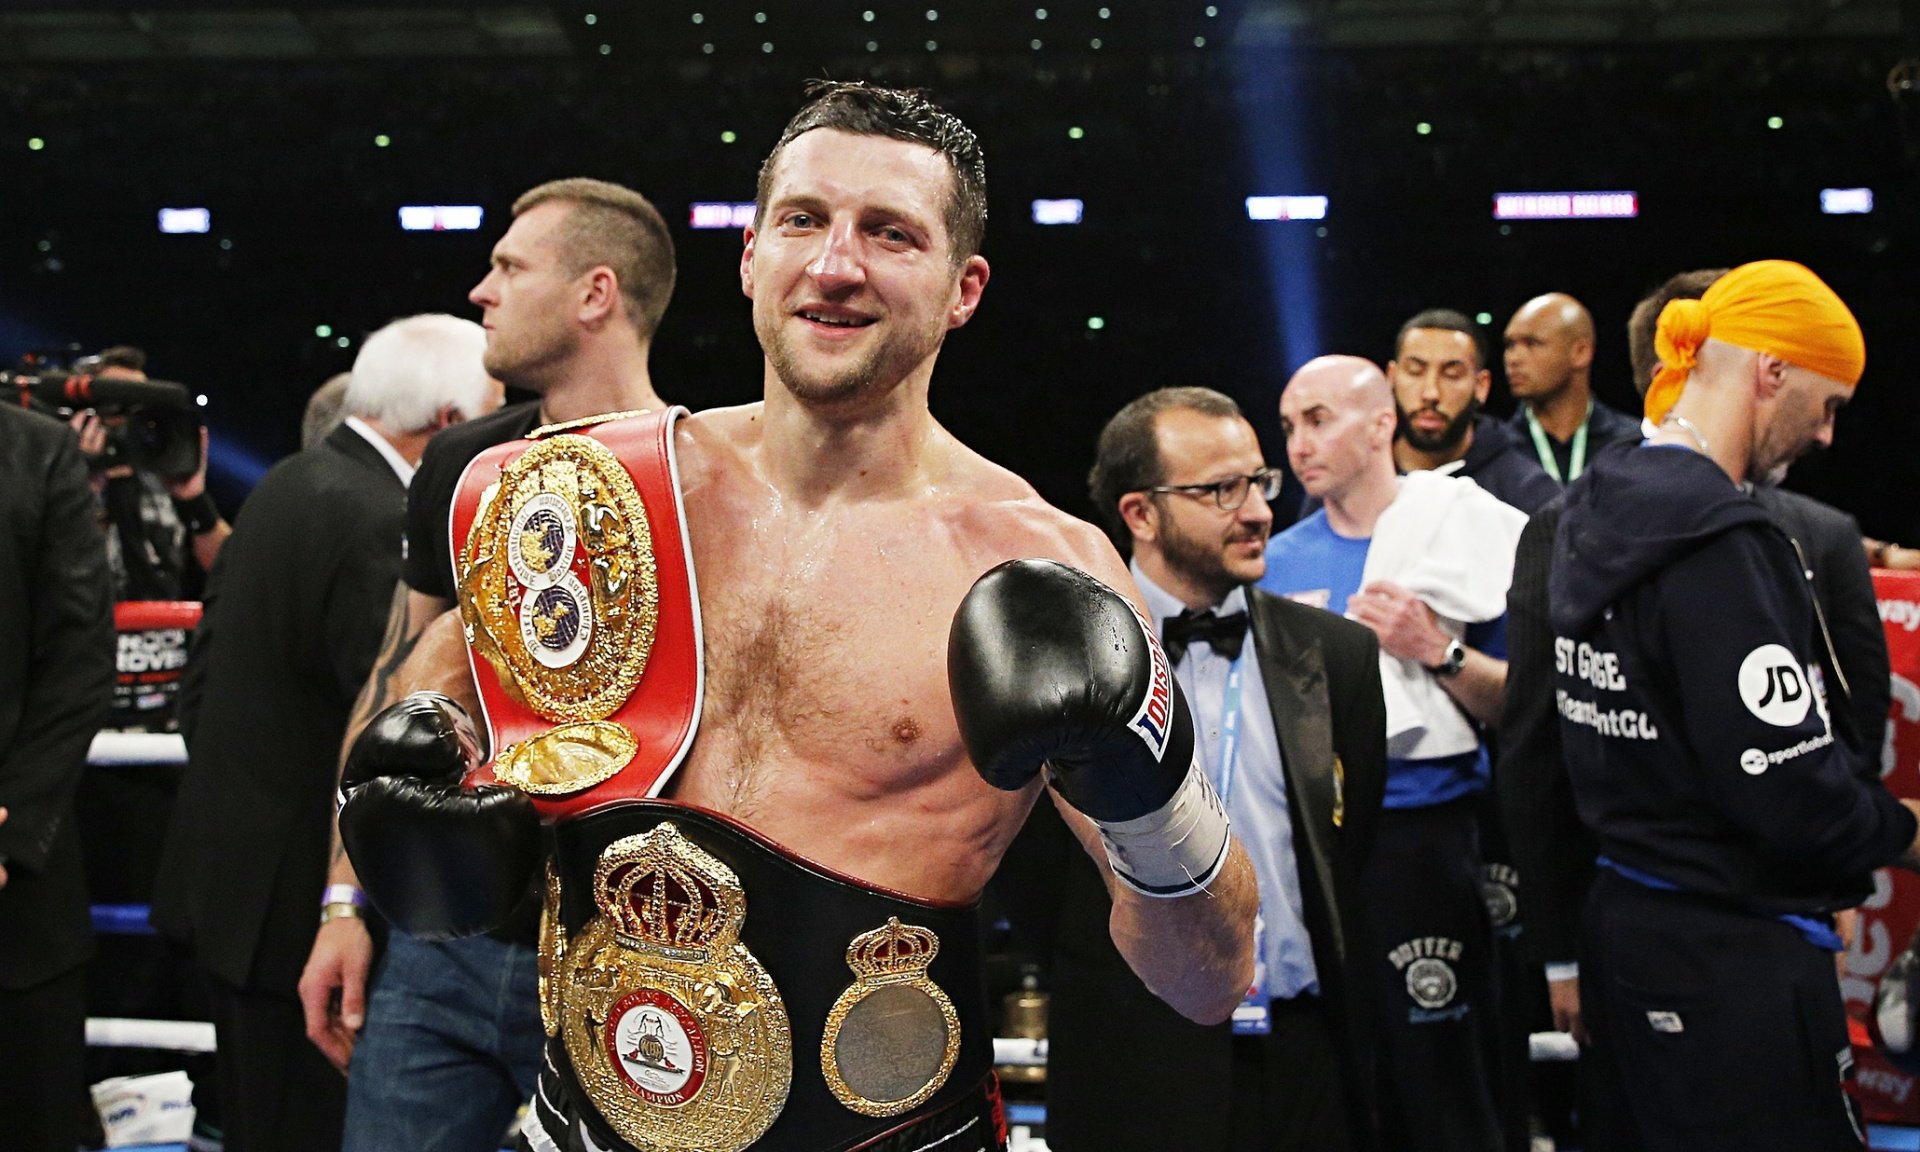  Carl Froch loses WBA super-middleweight belt after failing to defend title 